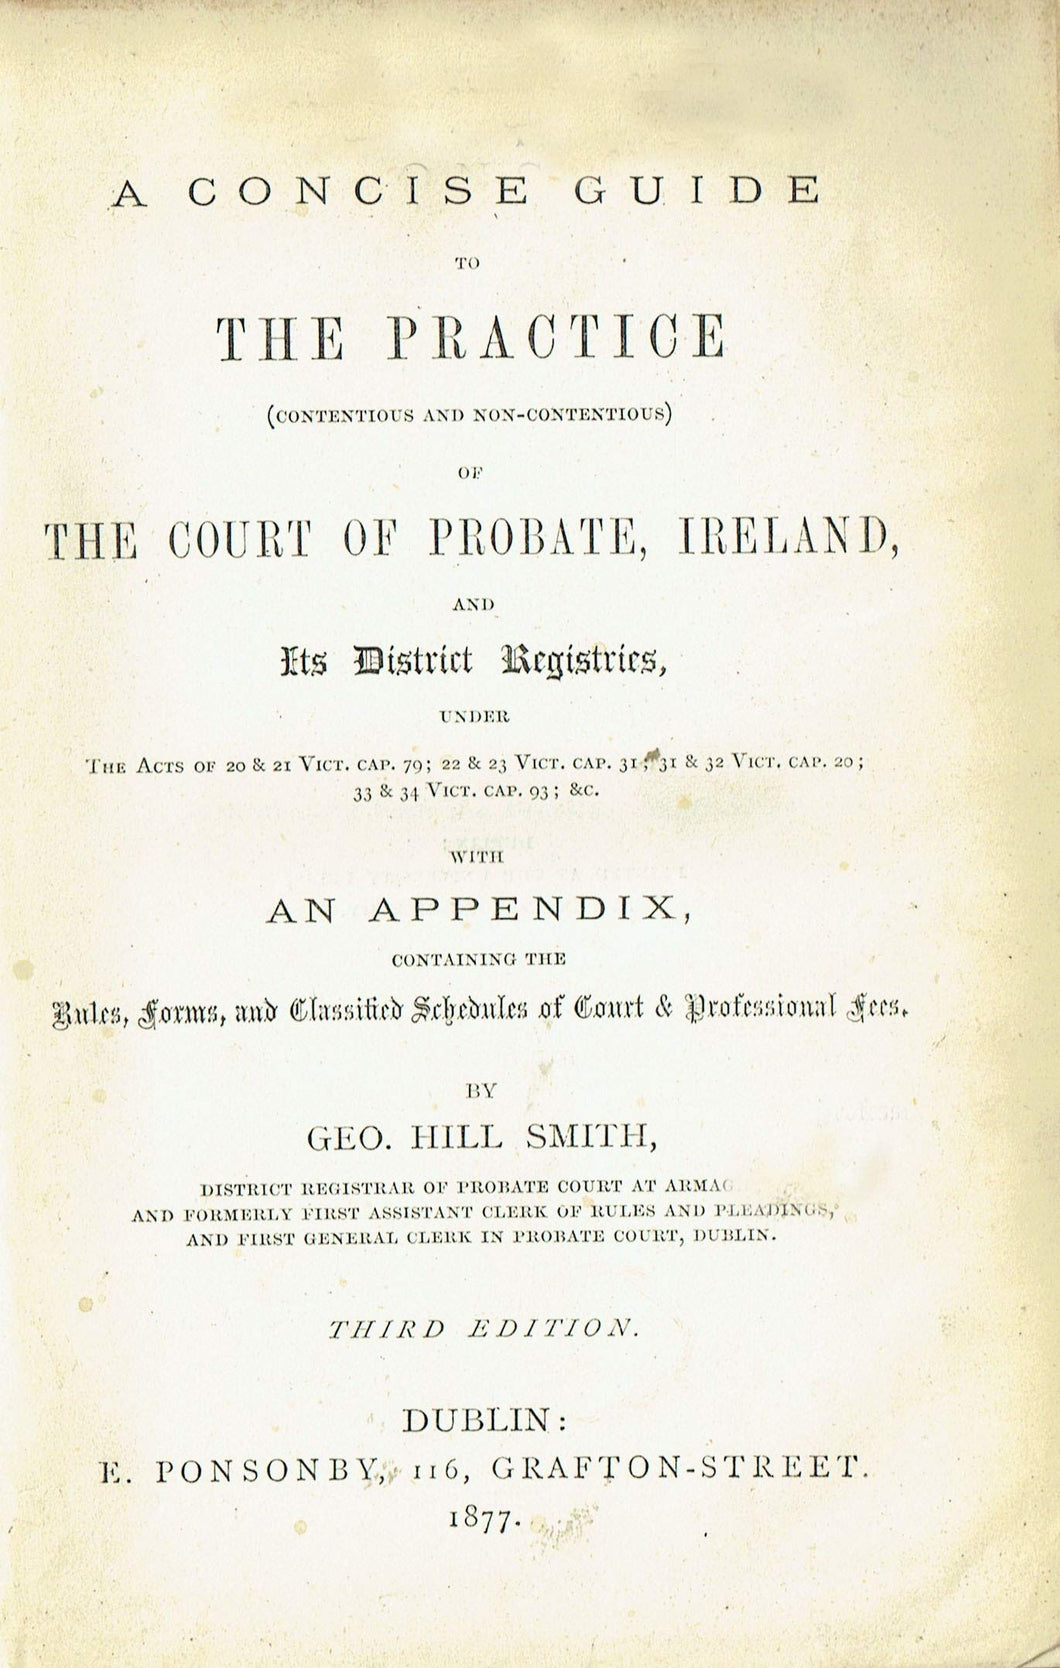 A Concise Guide To The Practice Of The Court Of Probate Ireland, And Its District Registries.